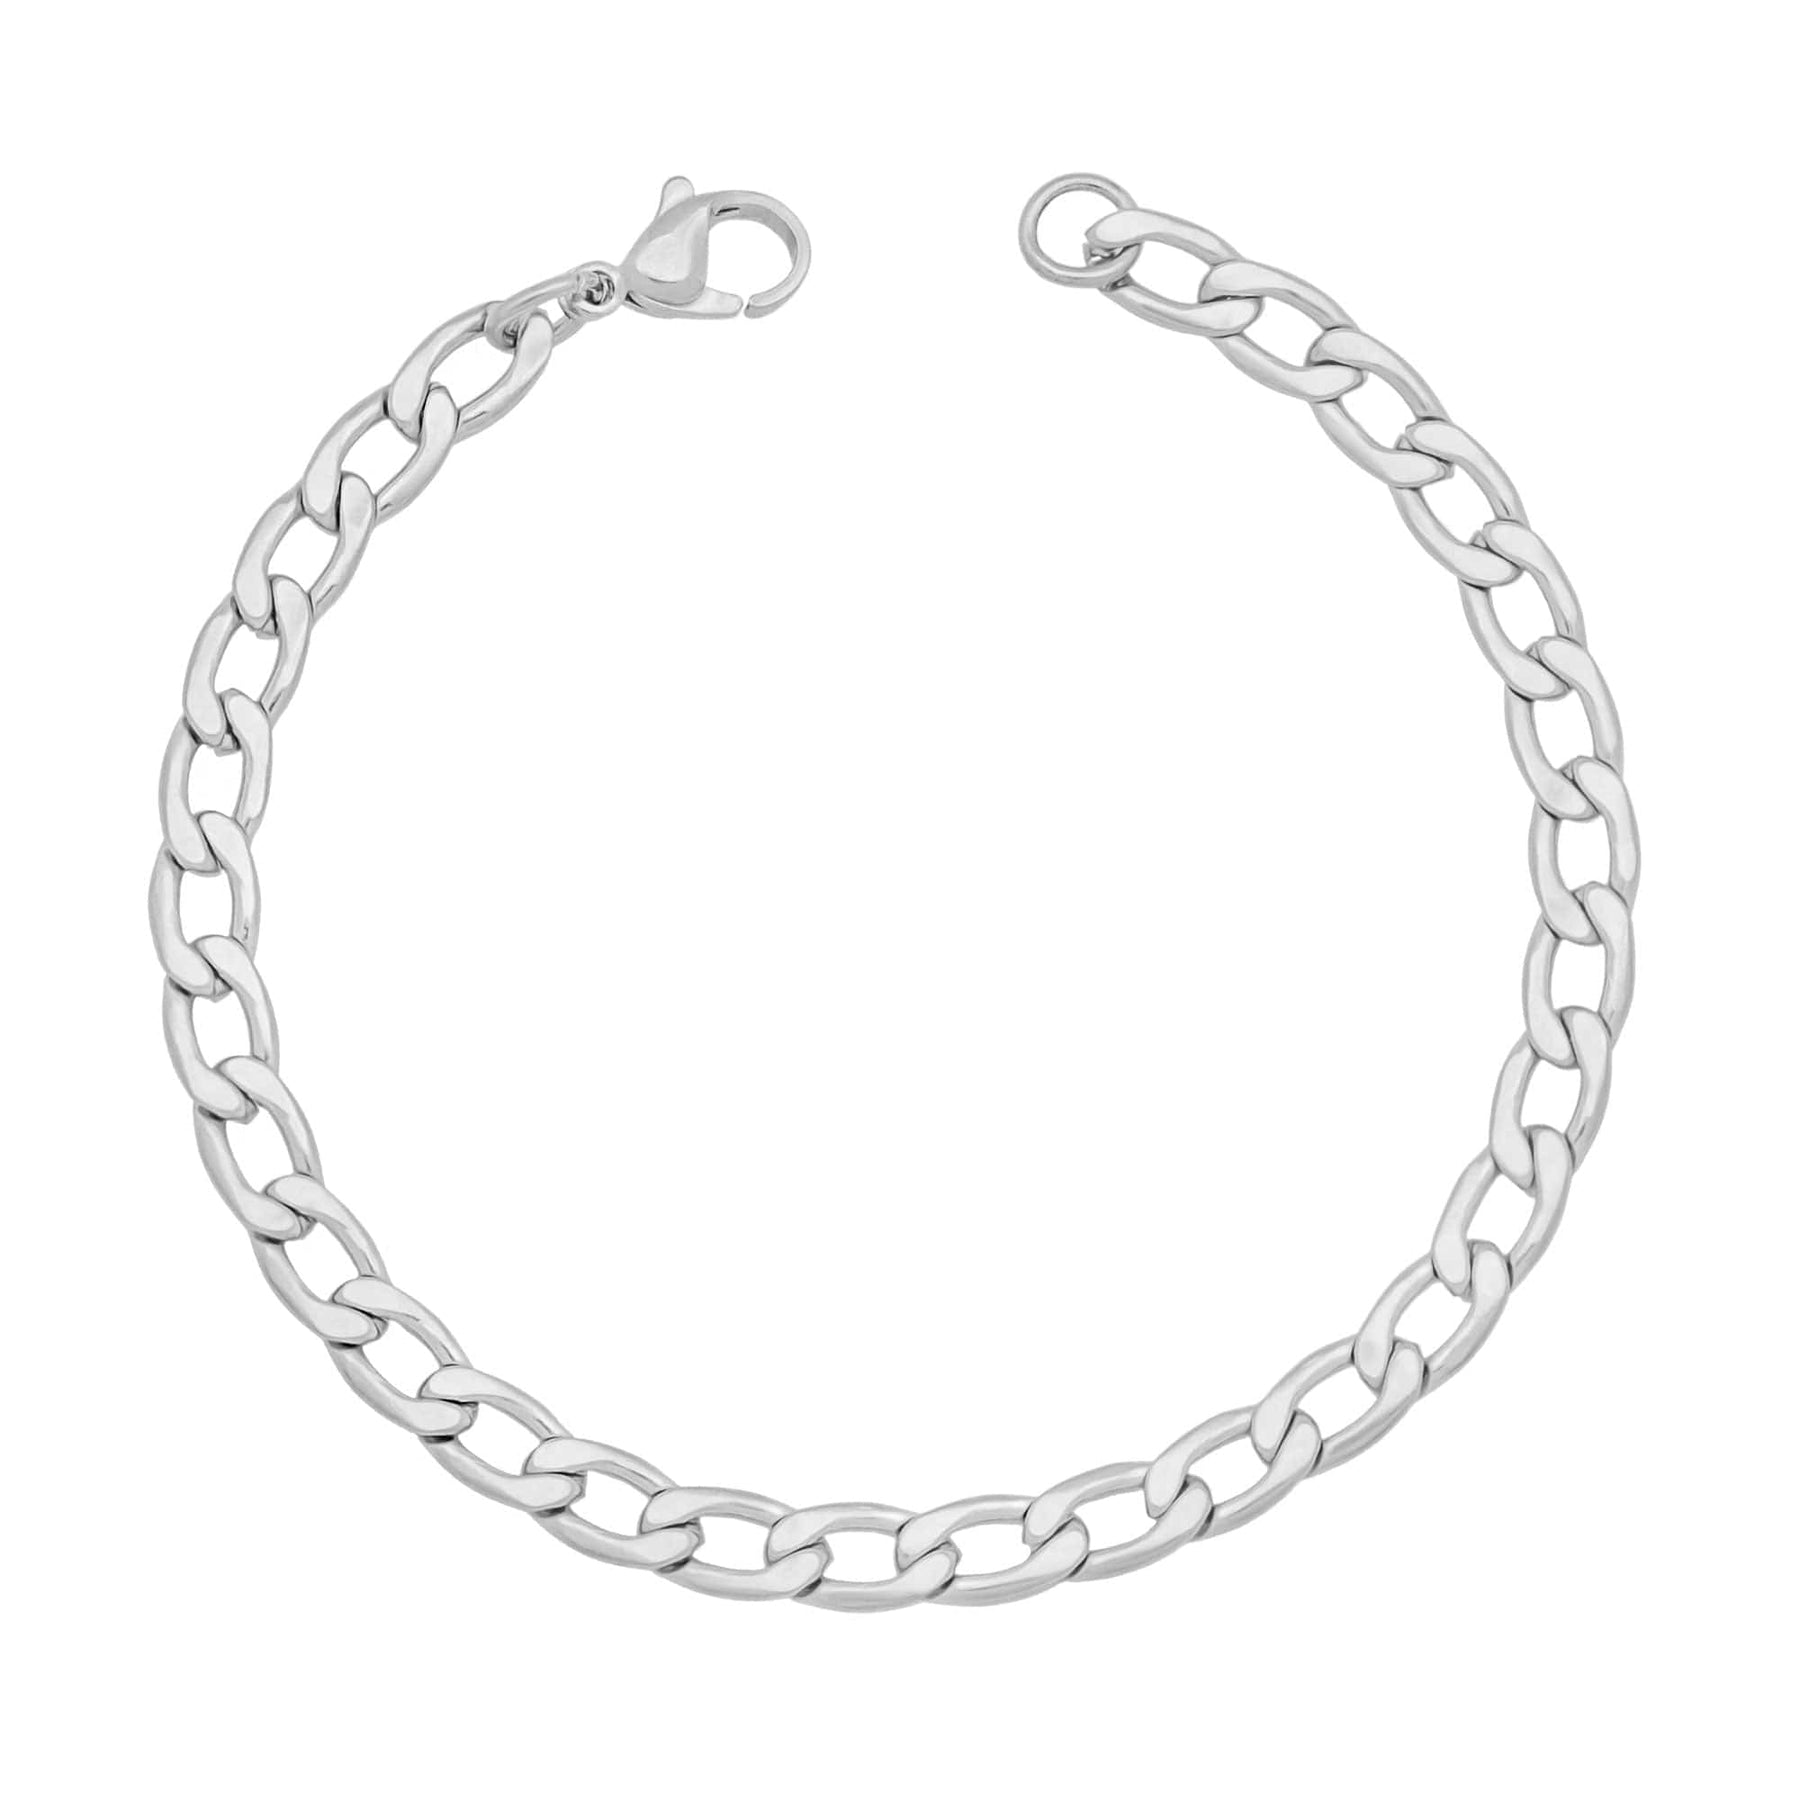 BohoMoon Stainless Steel Alessia Bracelet Silver / Small